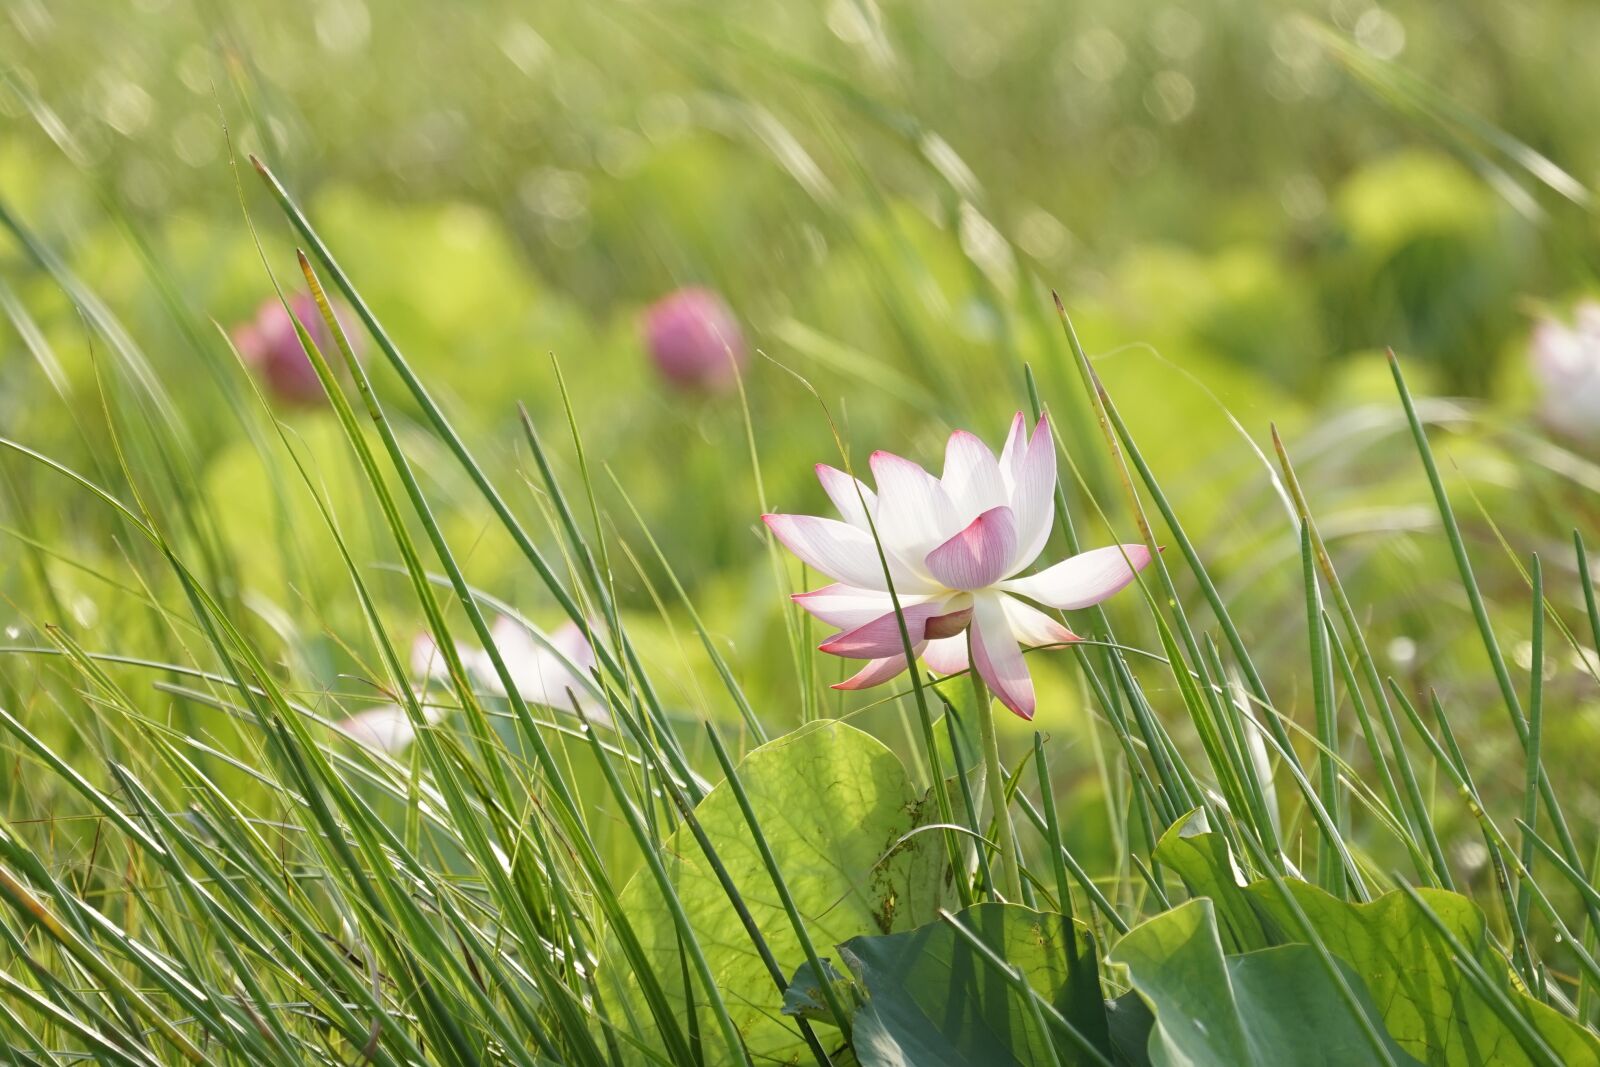 Sony a7 II sample photo. Lotus, flowers, nature photography